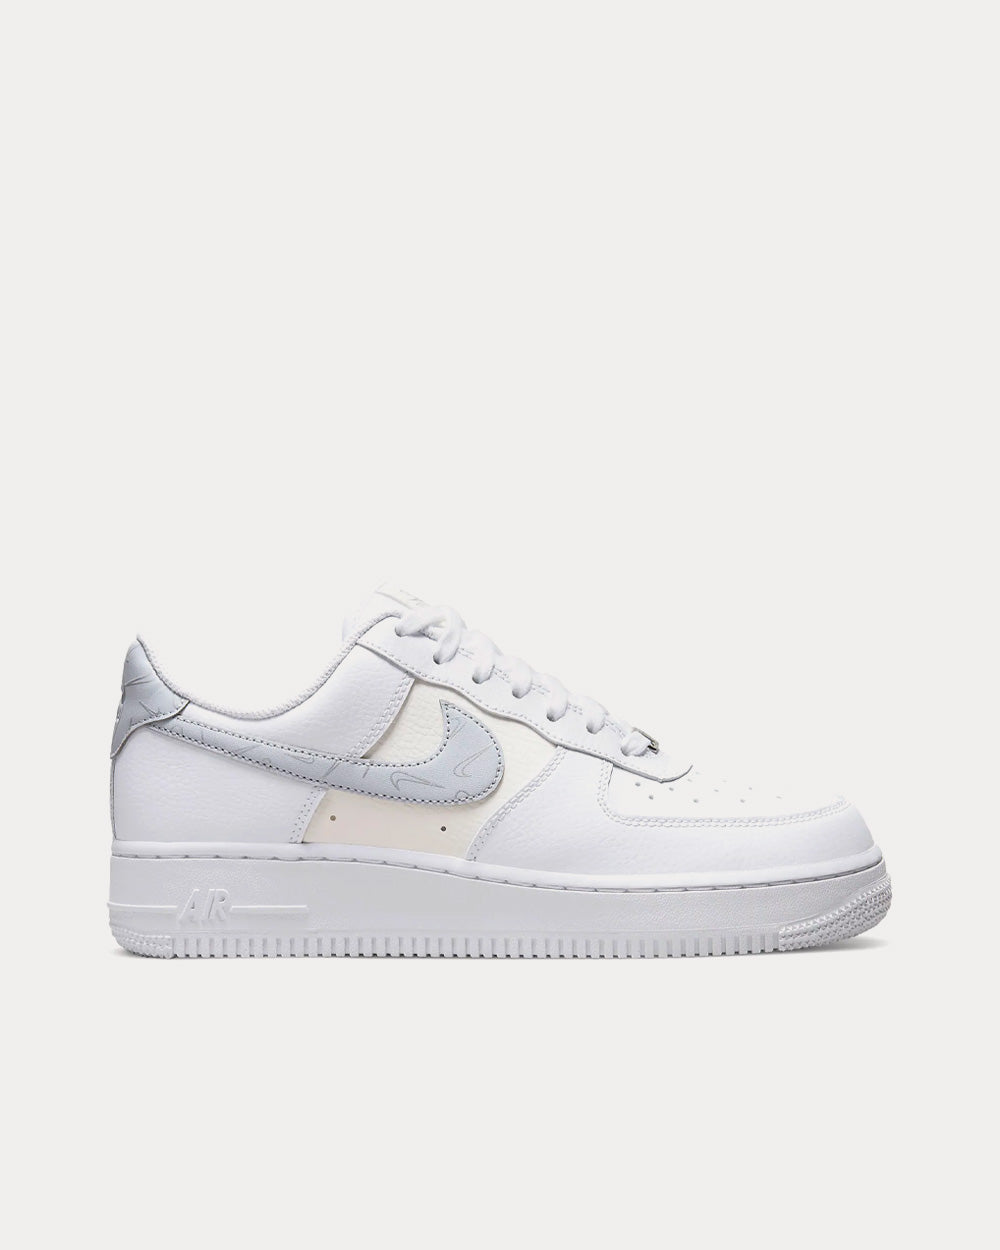 Air Force 1 '07 White / Sail / Metallic Silver / Pure Platinum Low Top  Sneakers